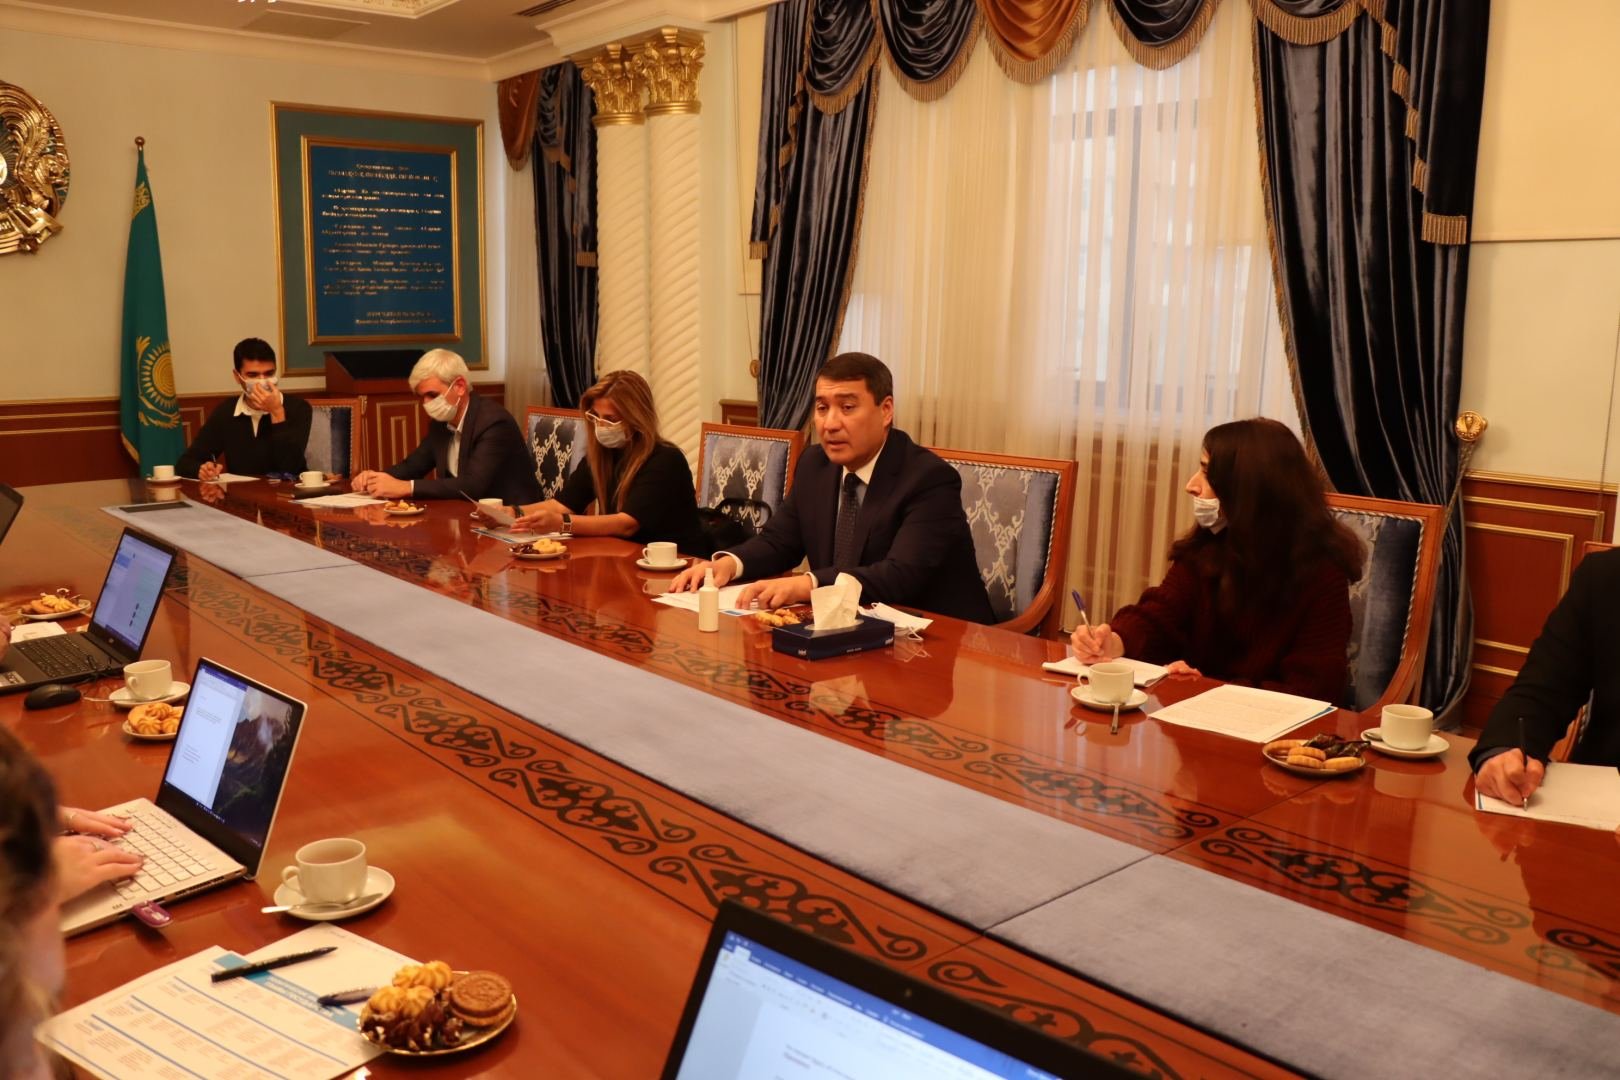 Kazakhstan creates all conditions for holding competitive election - ambassador